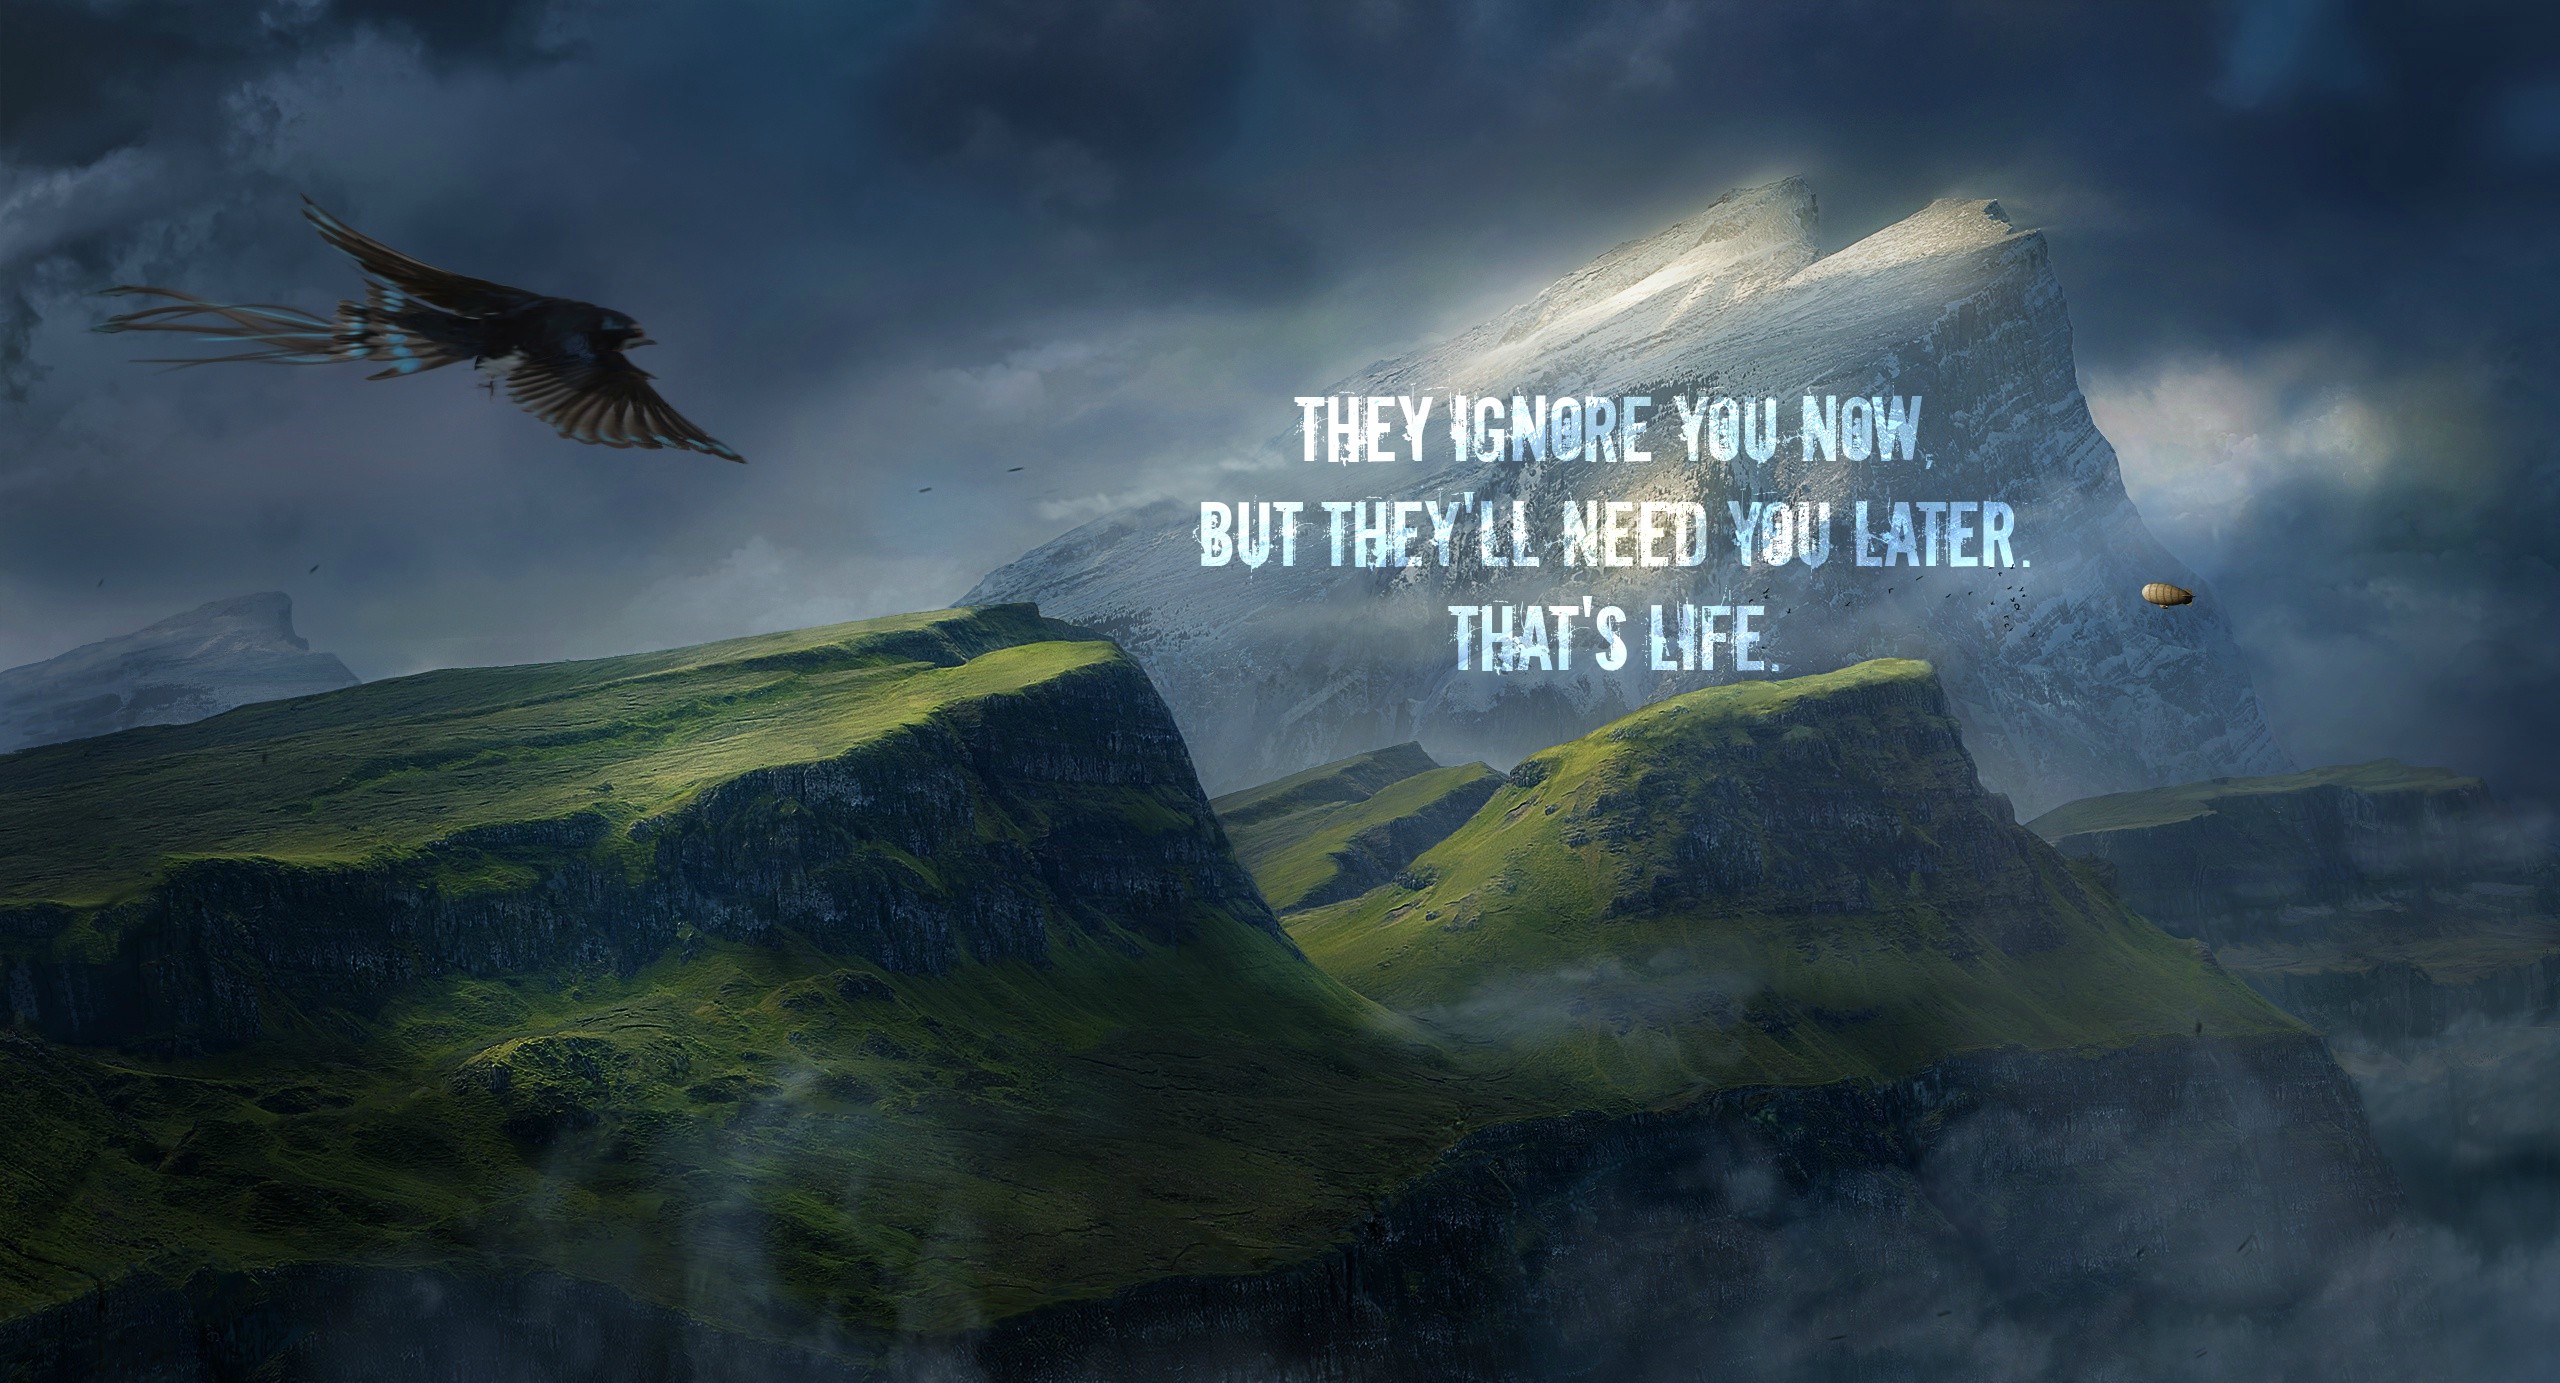 eagle, nature, inspirational, quote, mountains, landscape, animals, digital art, birds Gallery HD Wallpaper